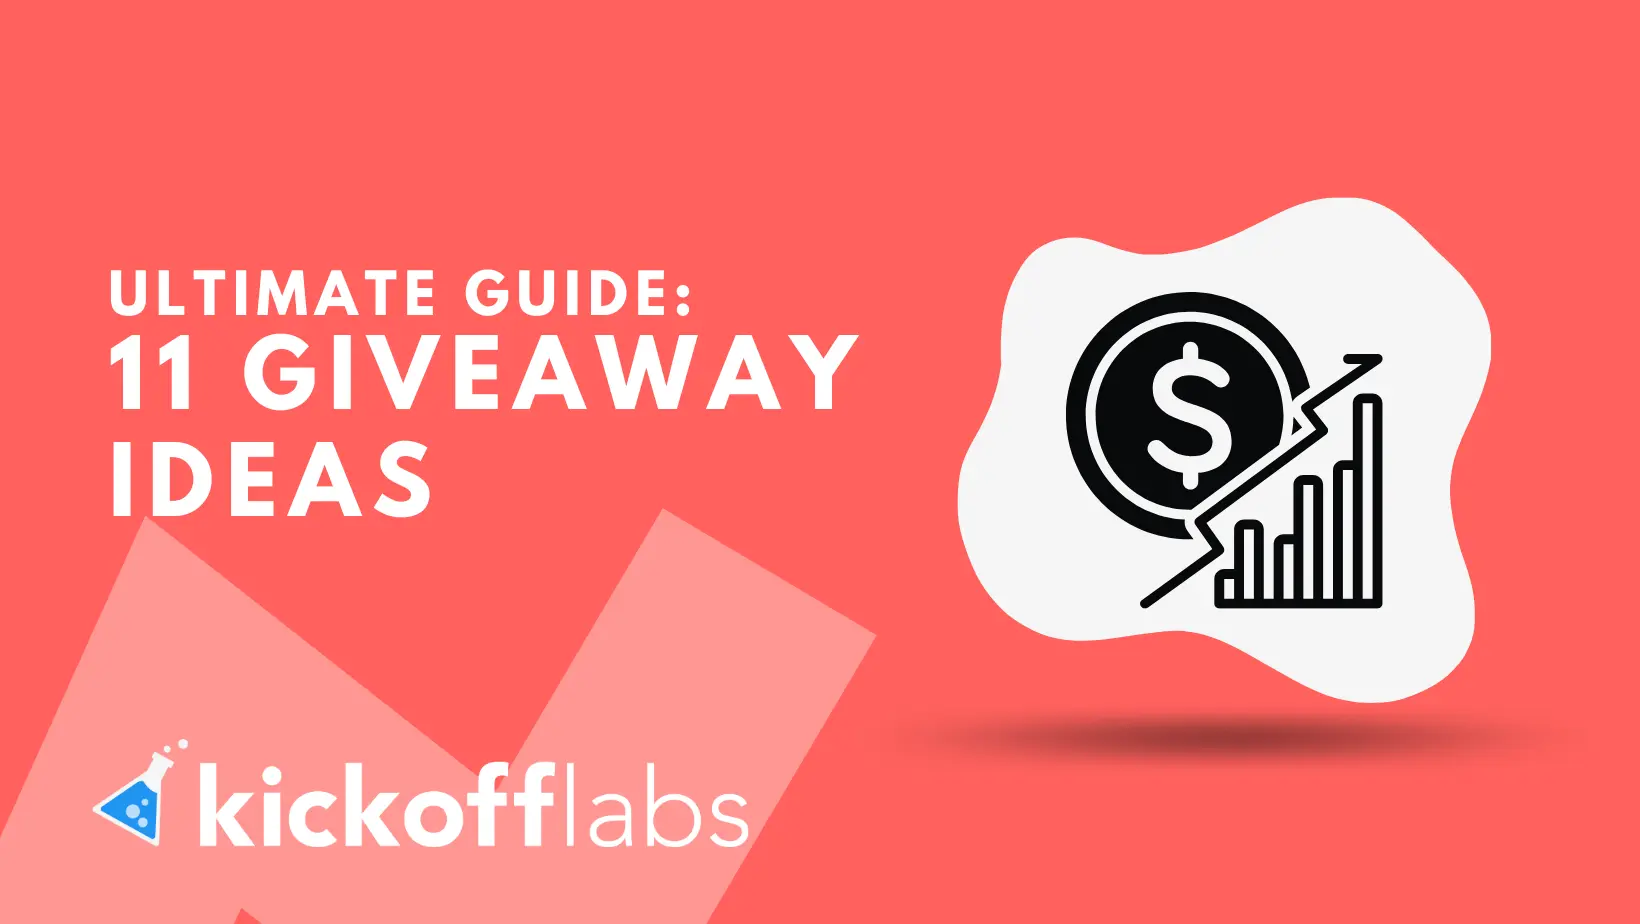 11 Giveaway Ideas to Grow Sales